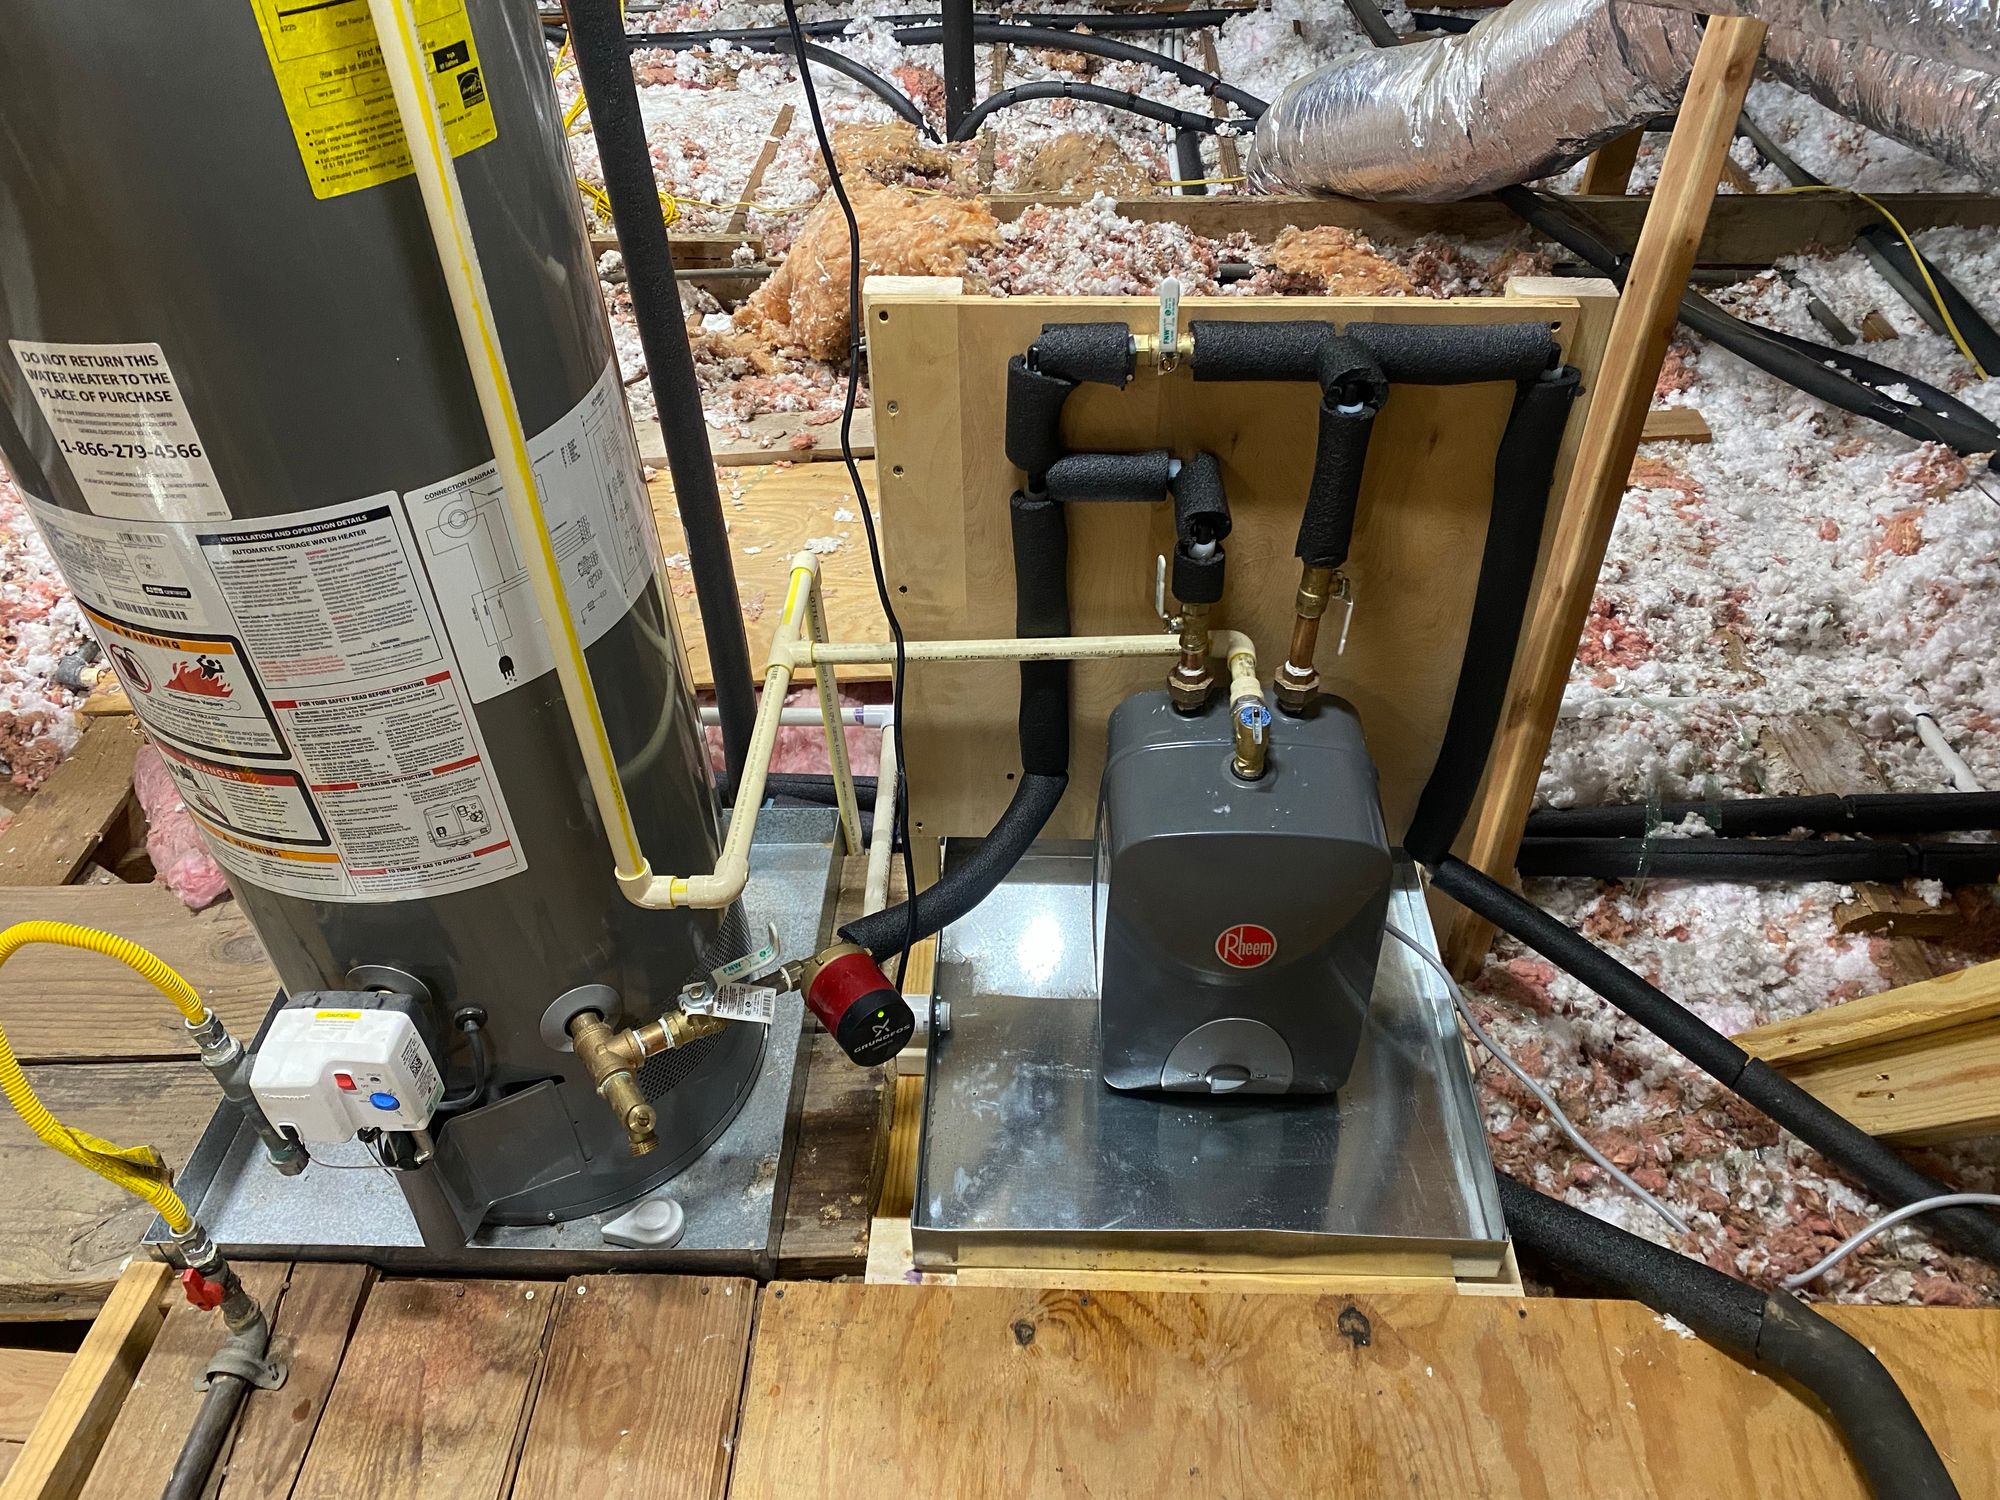 Redundant Water Heater - Never be without hot water